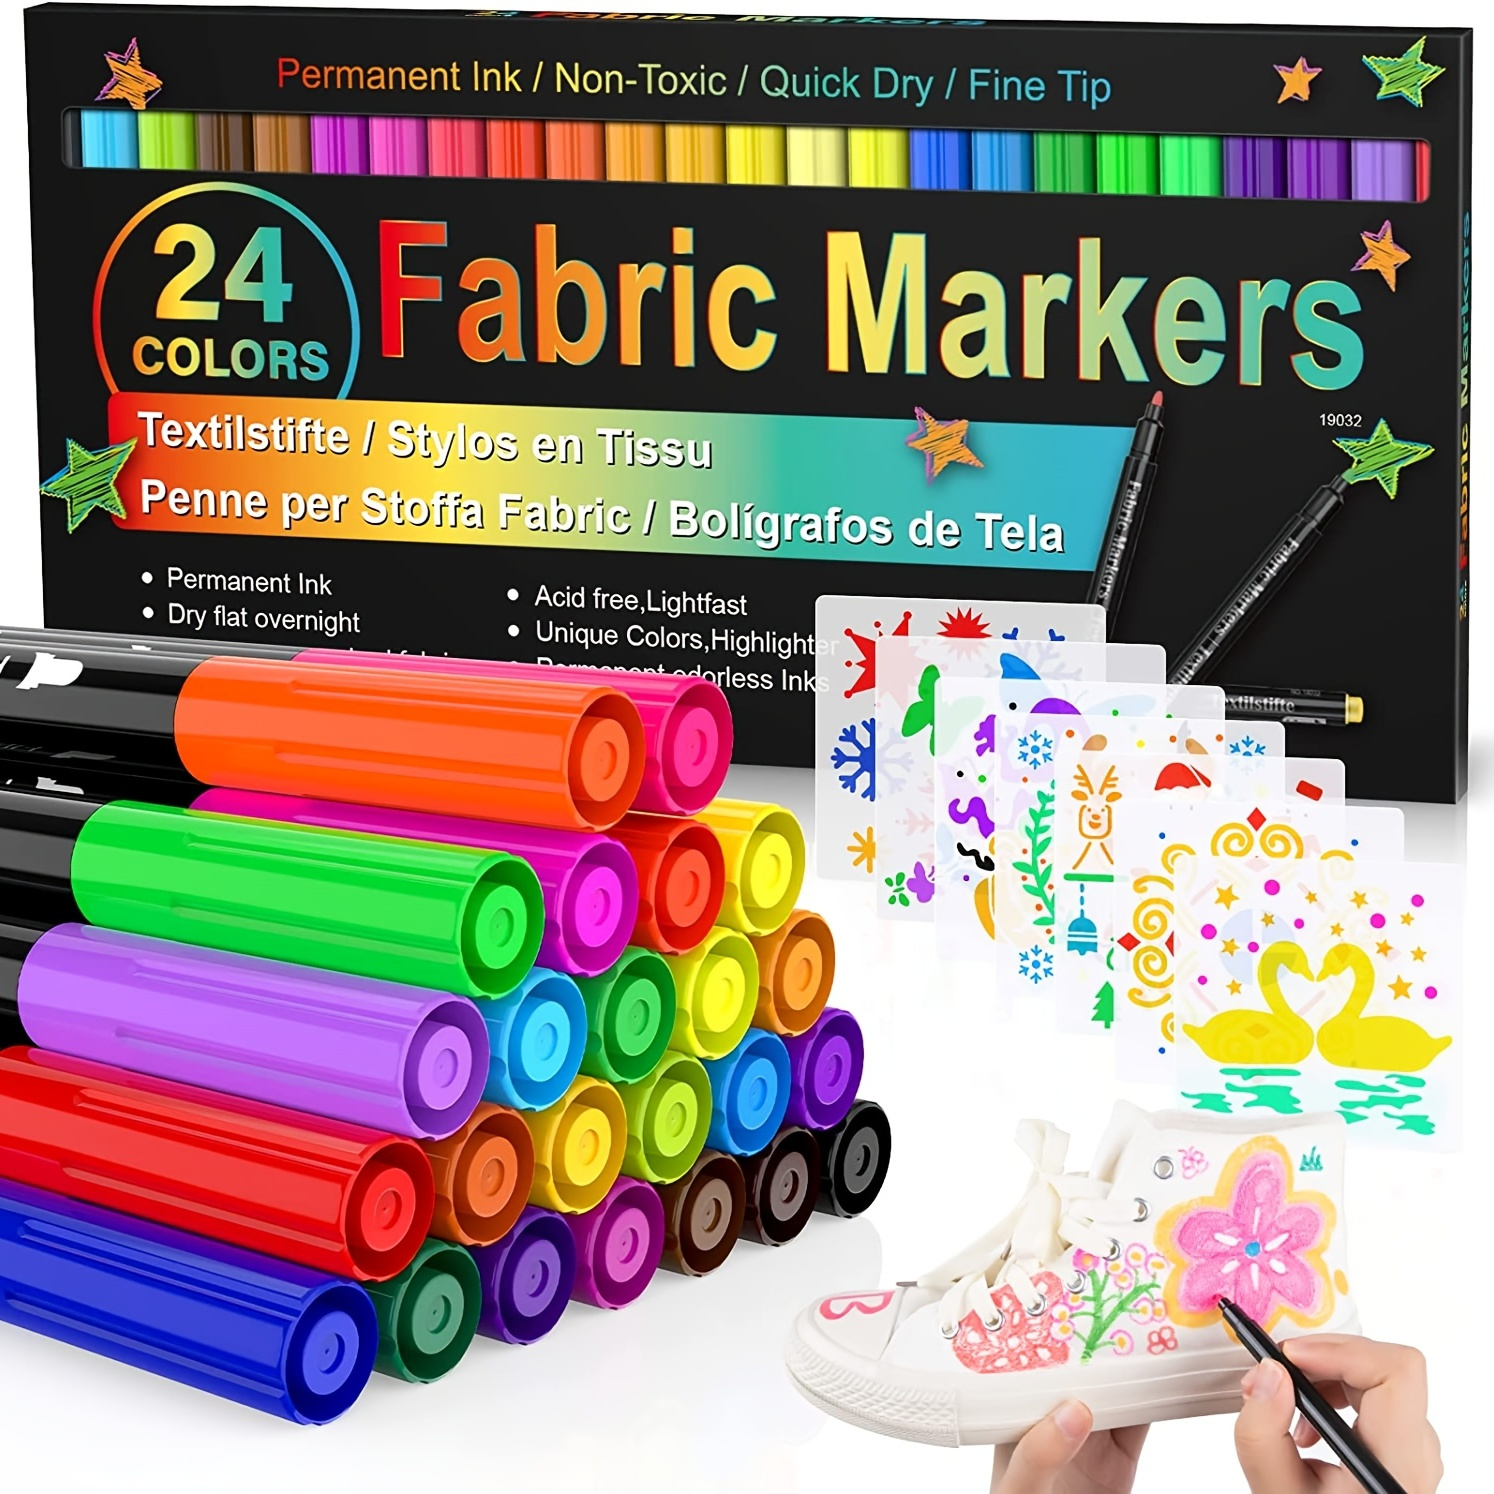 Fabric Markers Permanent for Clothes, Fabric Pens Permanent No Bleed, Fine  Tip Fabric Paint Pens Paint Markers for Kids,Non-Toxt - AliExpress